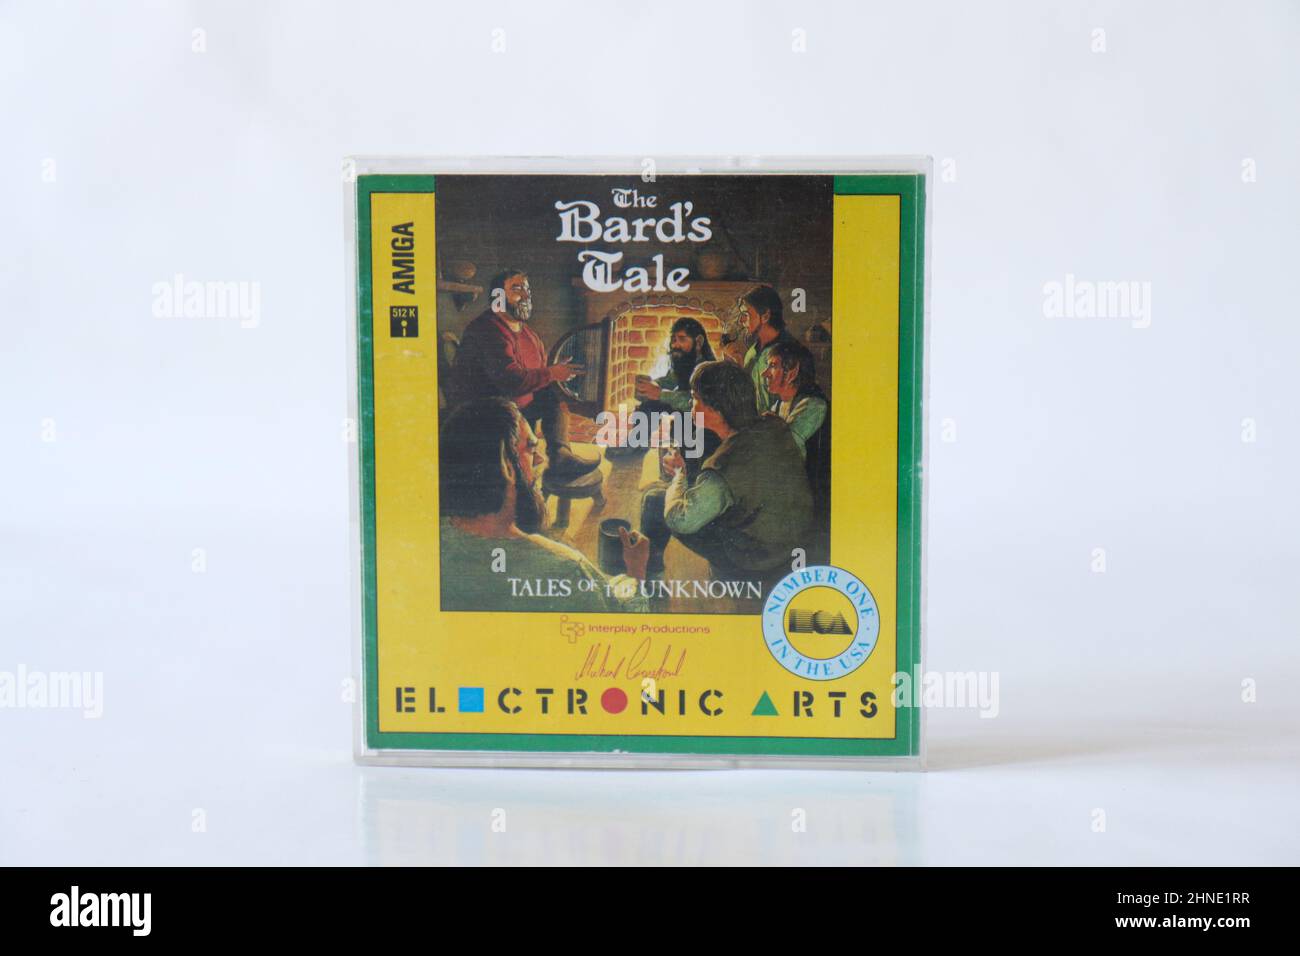 BERLIN - FEBRUARY 12, 2022: Vintage Retro Video Game THE BARD'S TALE - TALES OF THE UNKNOWN for the Commodore Amiga on Floppy Disks. Electronic Arts r Stock Photo